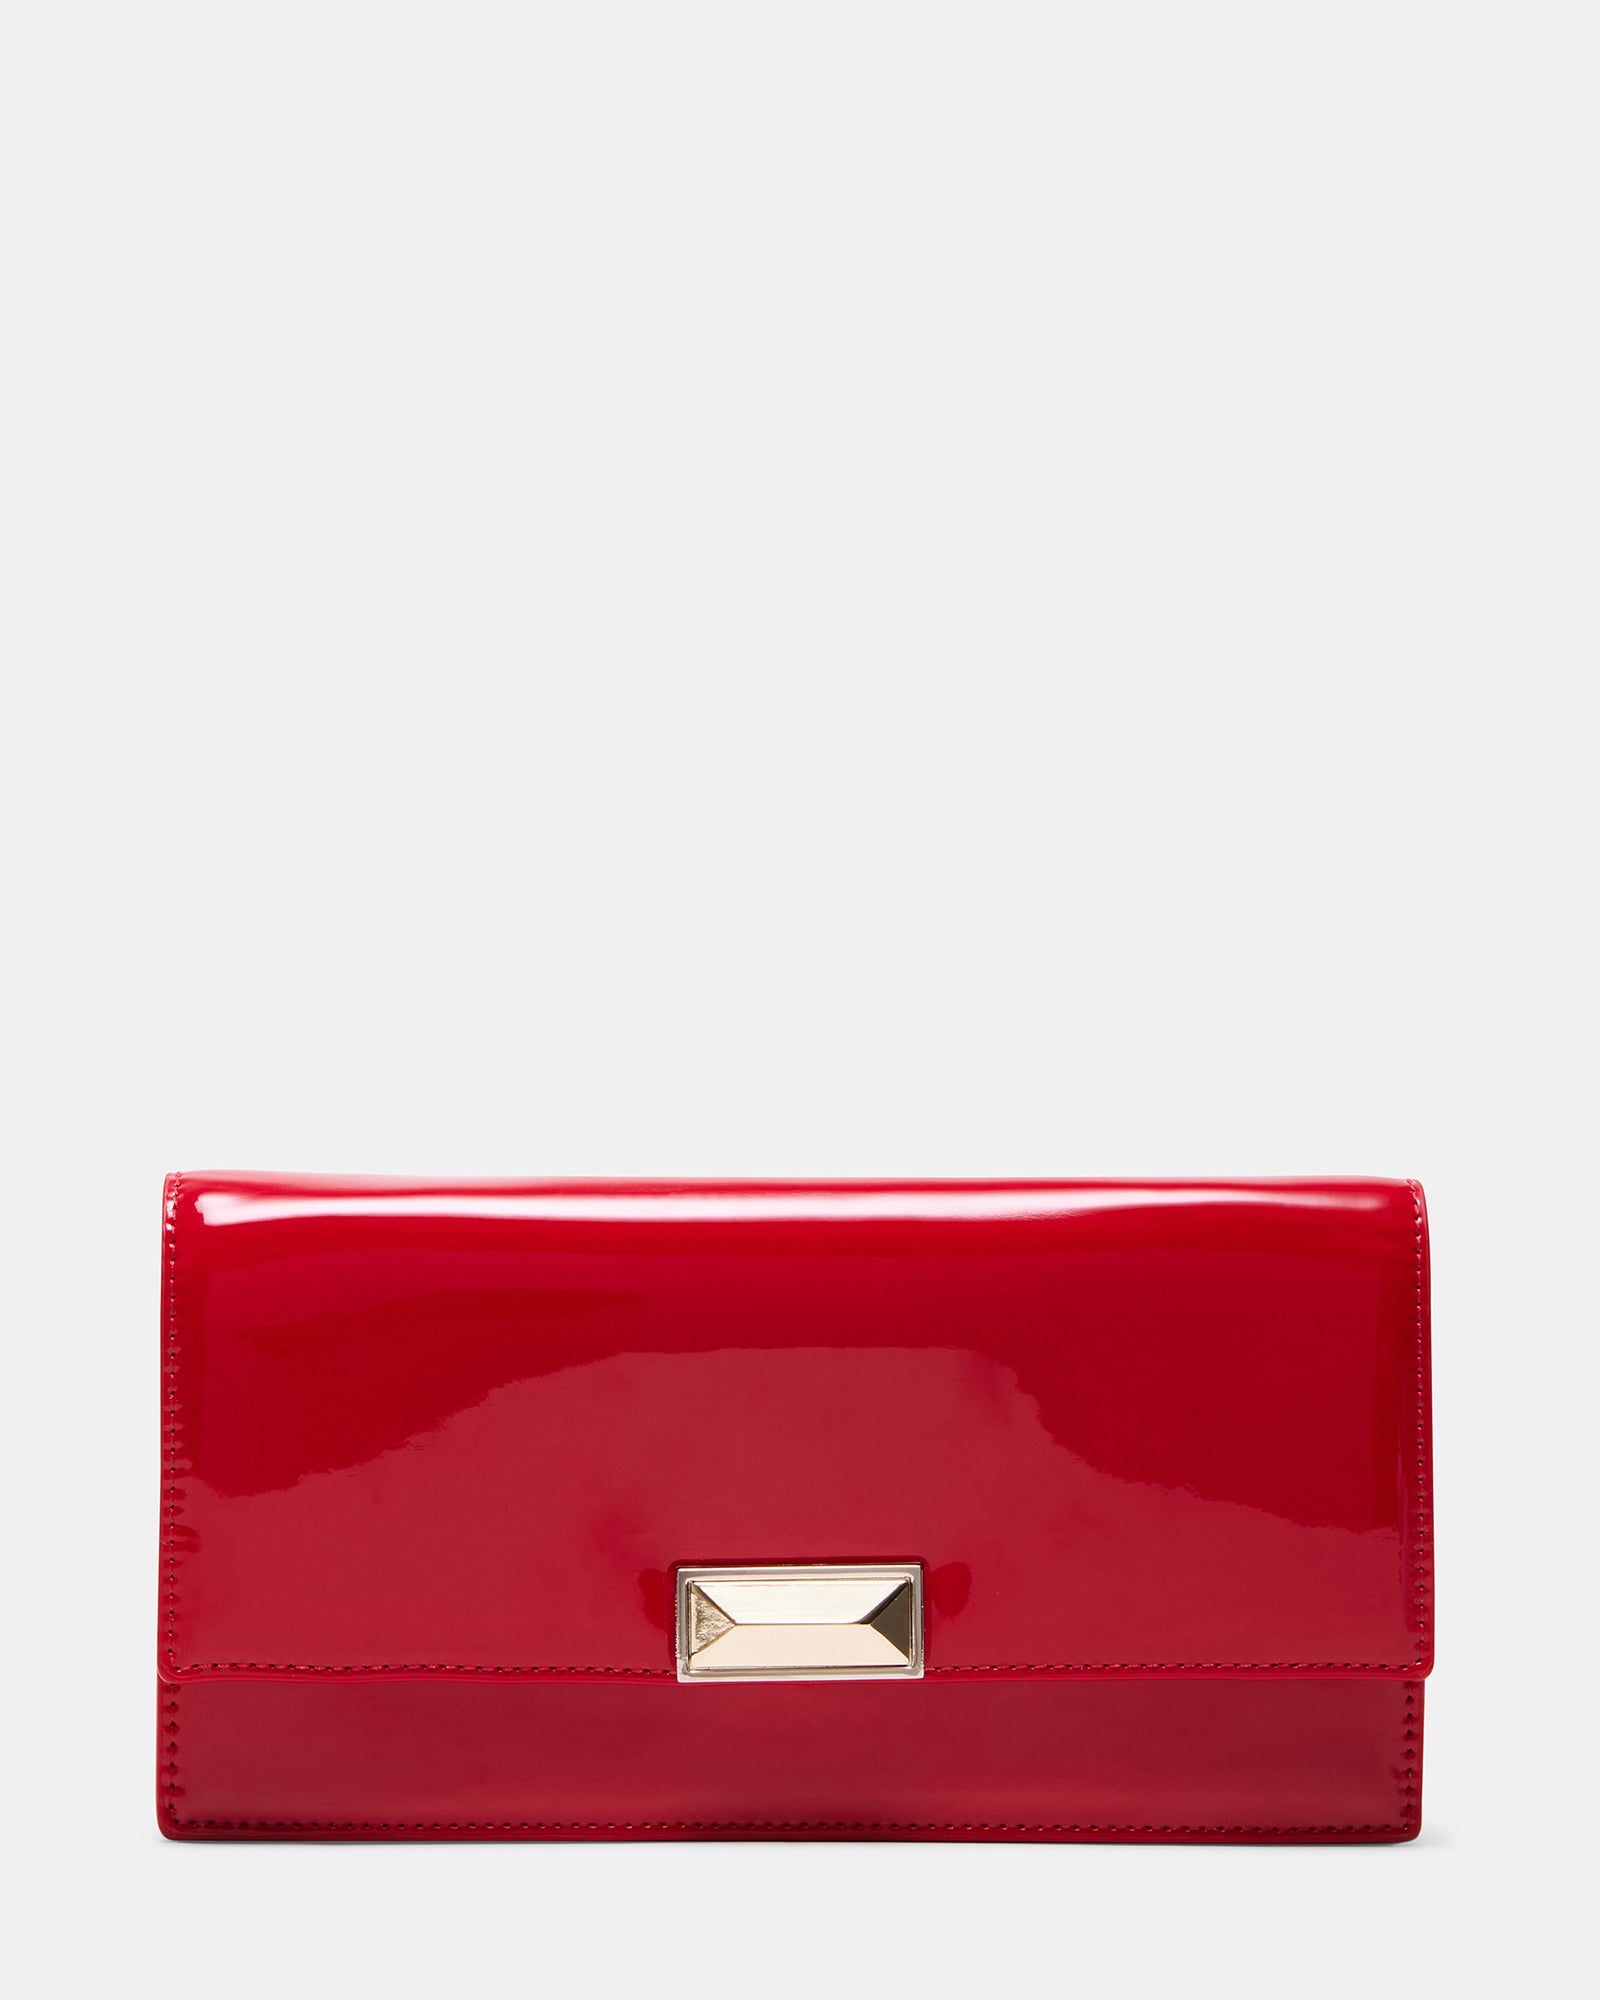 Stylish Evening Red Evening Bag For Women Perfect For Weddings, Parties,  And Special Occasions Crossbody Shoulder Purse With Chain Strap And  Lipstick Holder 231115 From Hu06, $28.01 | DHgate.Com